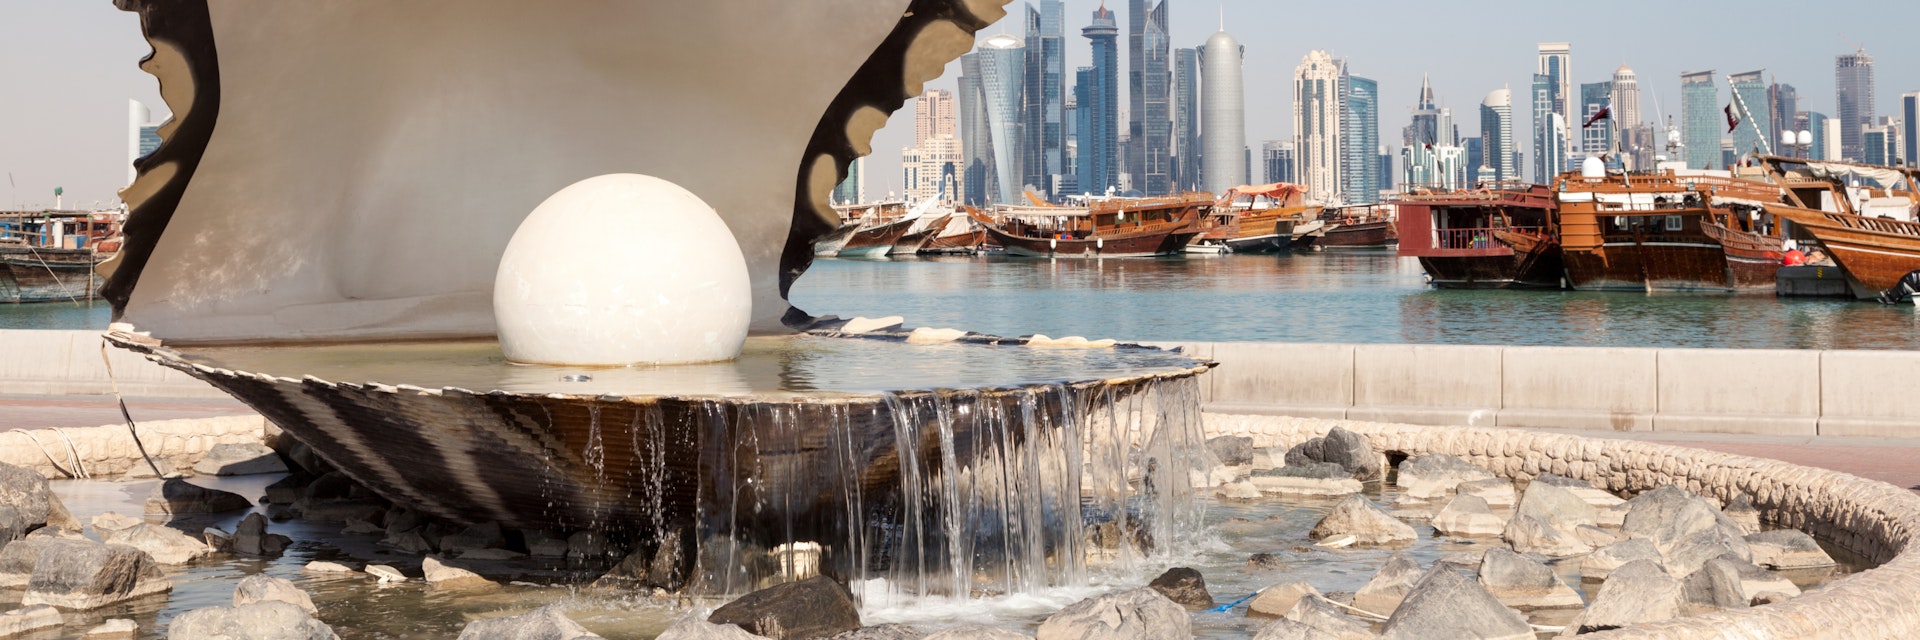 Pearl fountain at the corniche of Doha, Qatar, Middle East